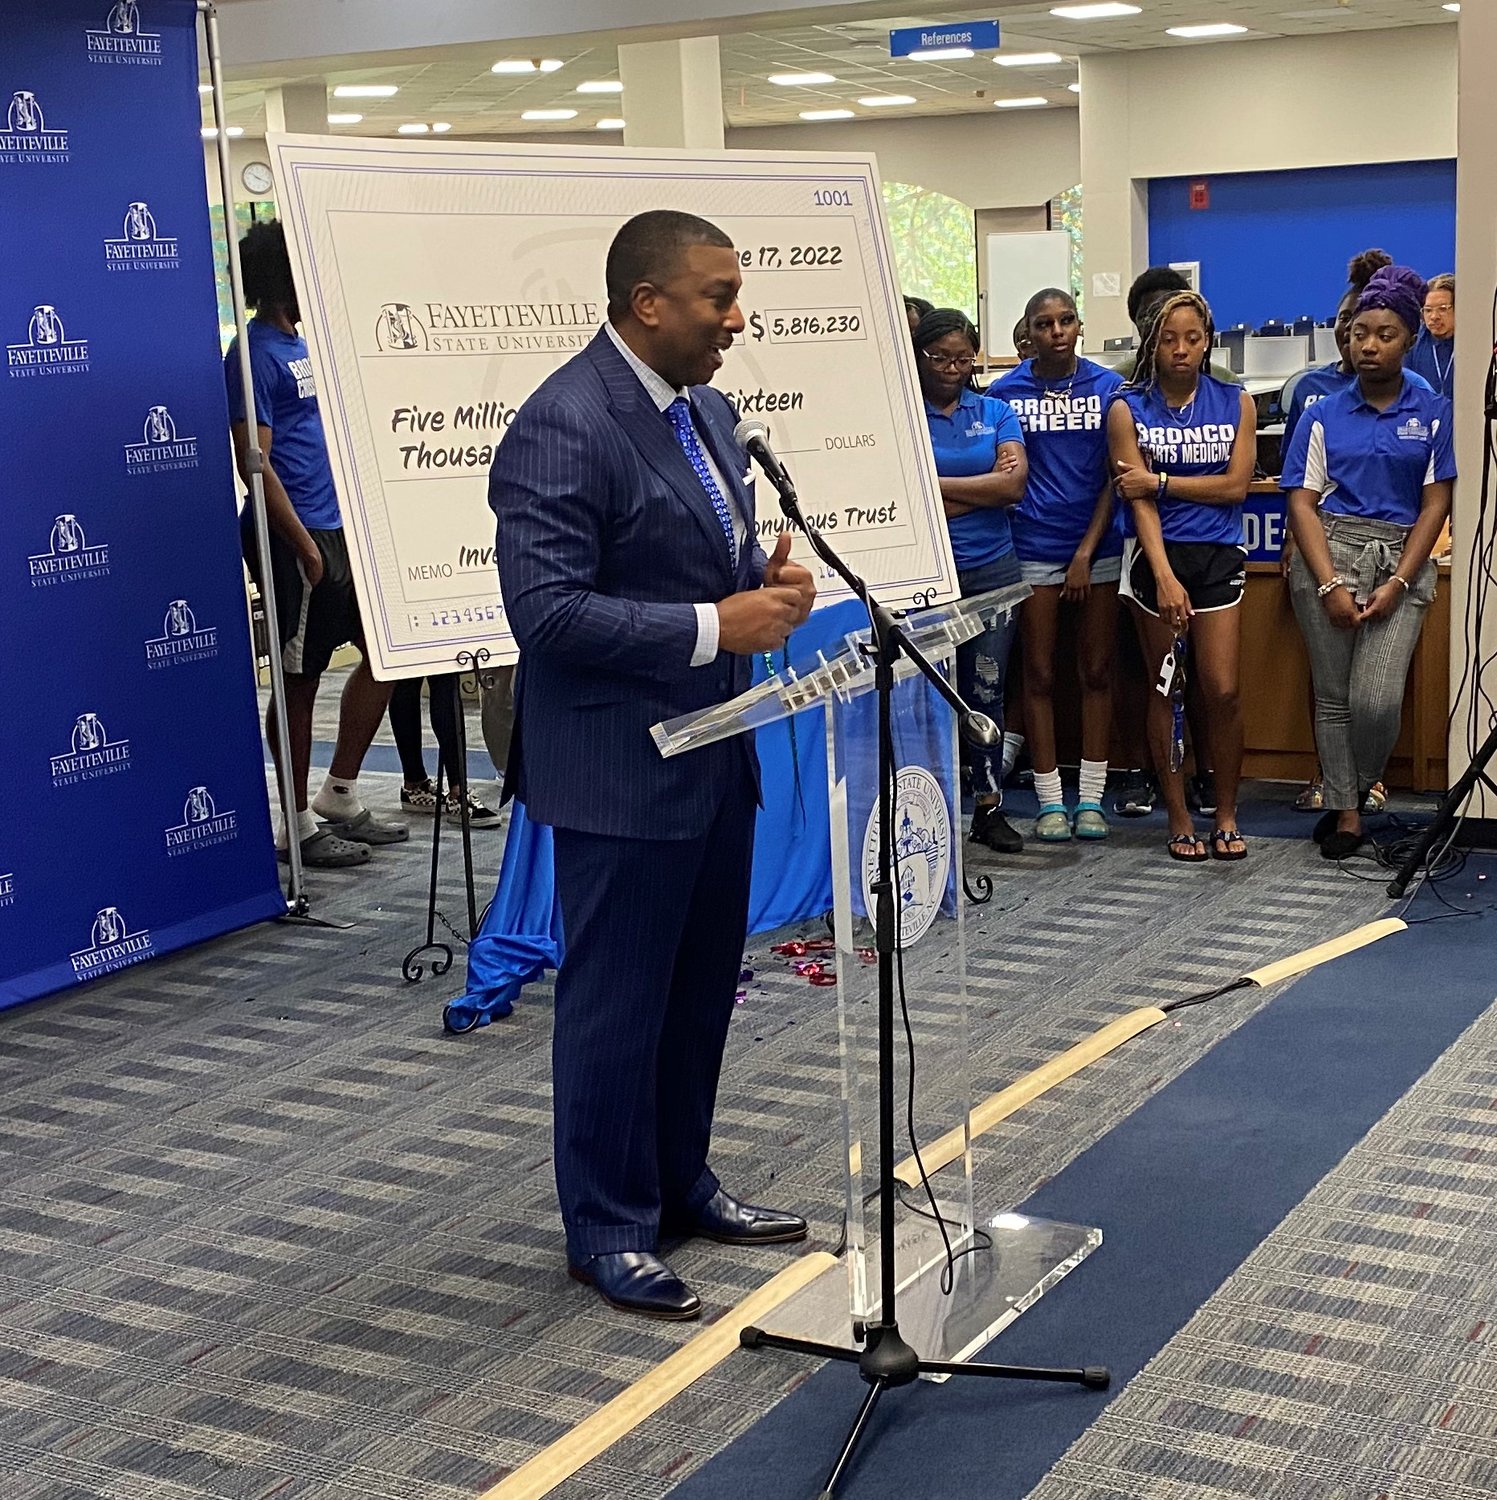 Fayetteville State University Chancellor Darrell Allison on Friday announces a historic gift of $5.8 million to support key initiatives at the school. It is the largest single private donation in the school’s history.